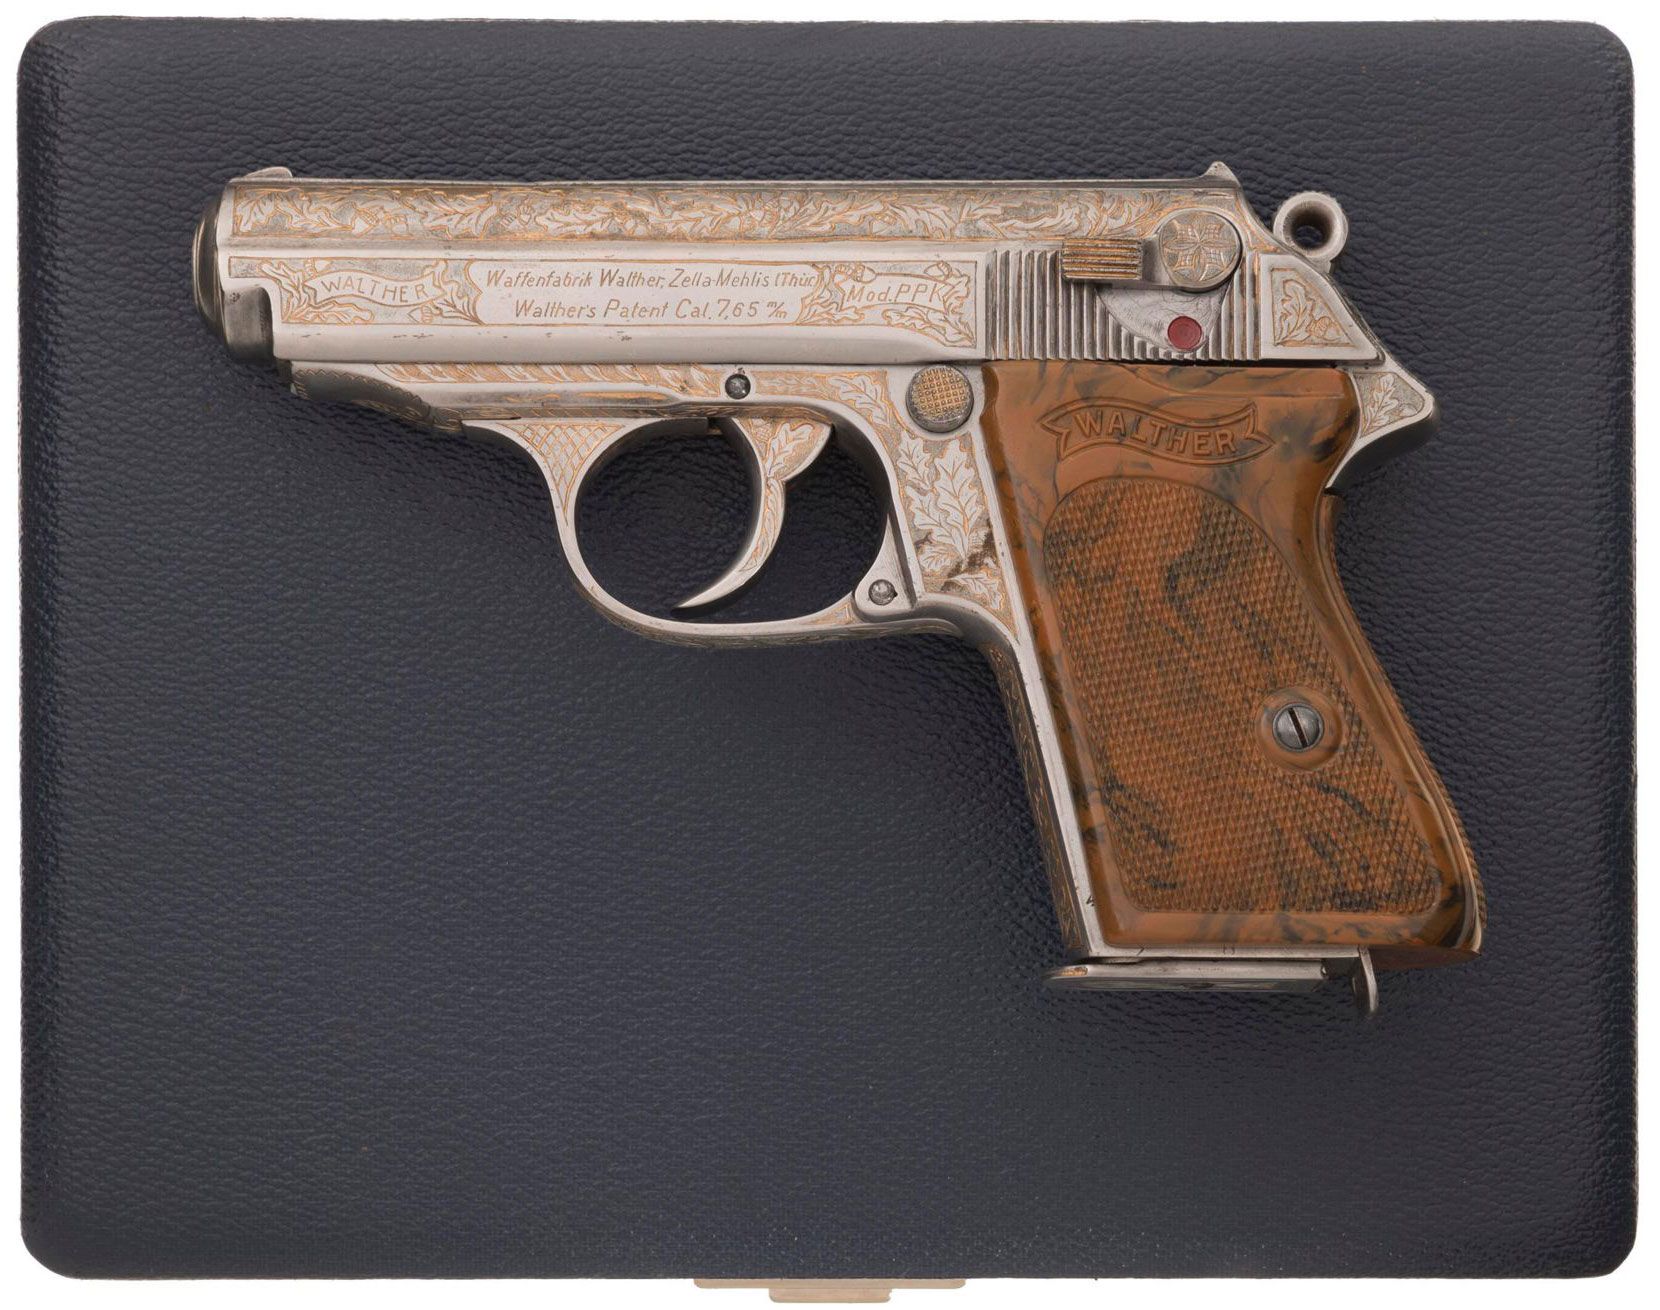 Lot 741: Engraved and Gold Washed Walther PPK Semi-Automatic Pistol